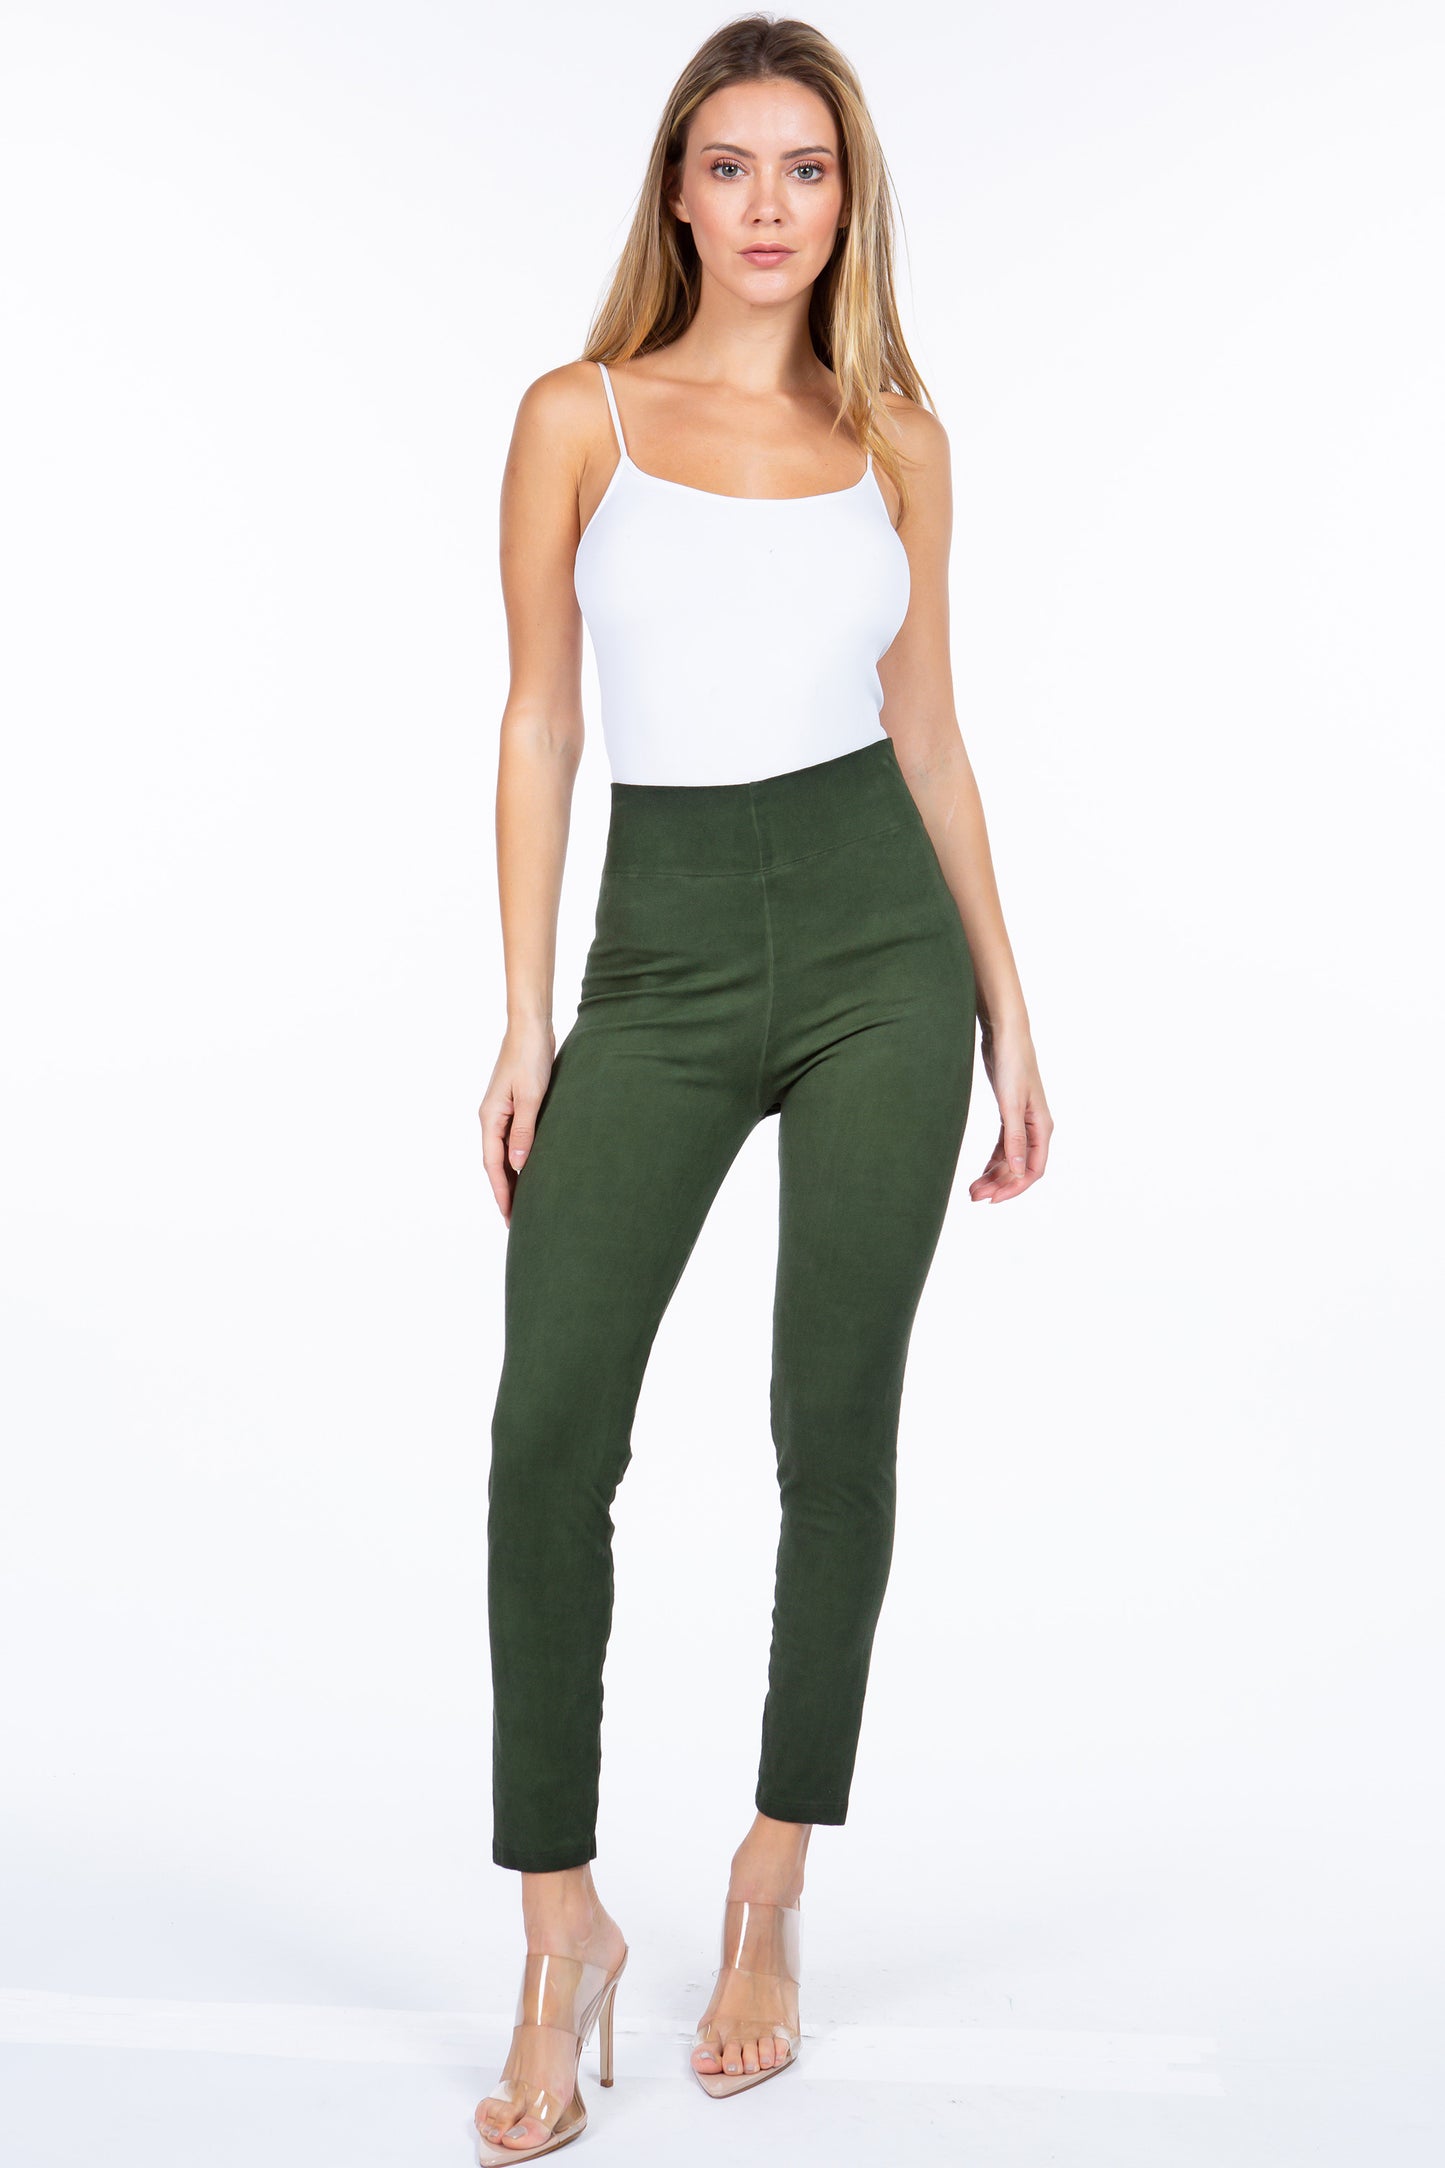 Oil-Washed Cotton Stretch Leggings